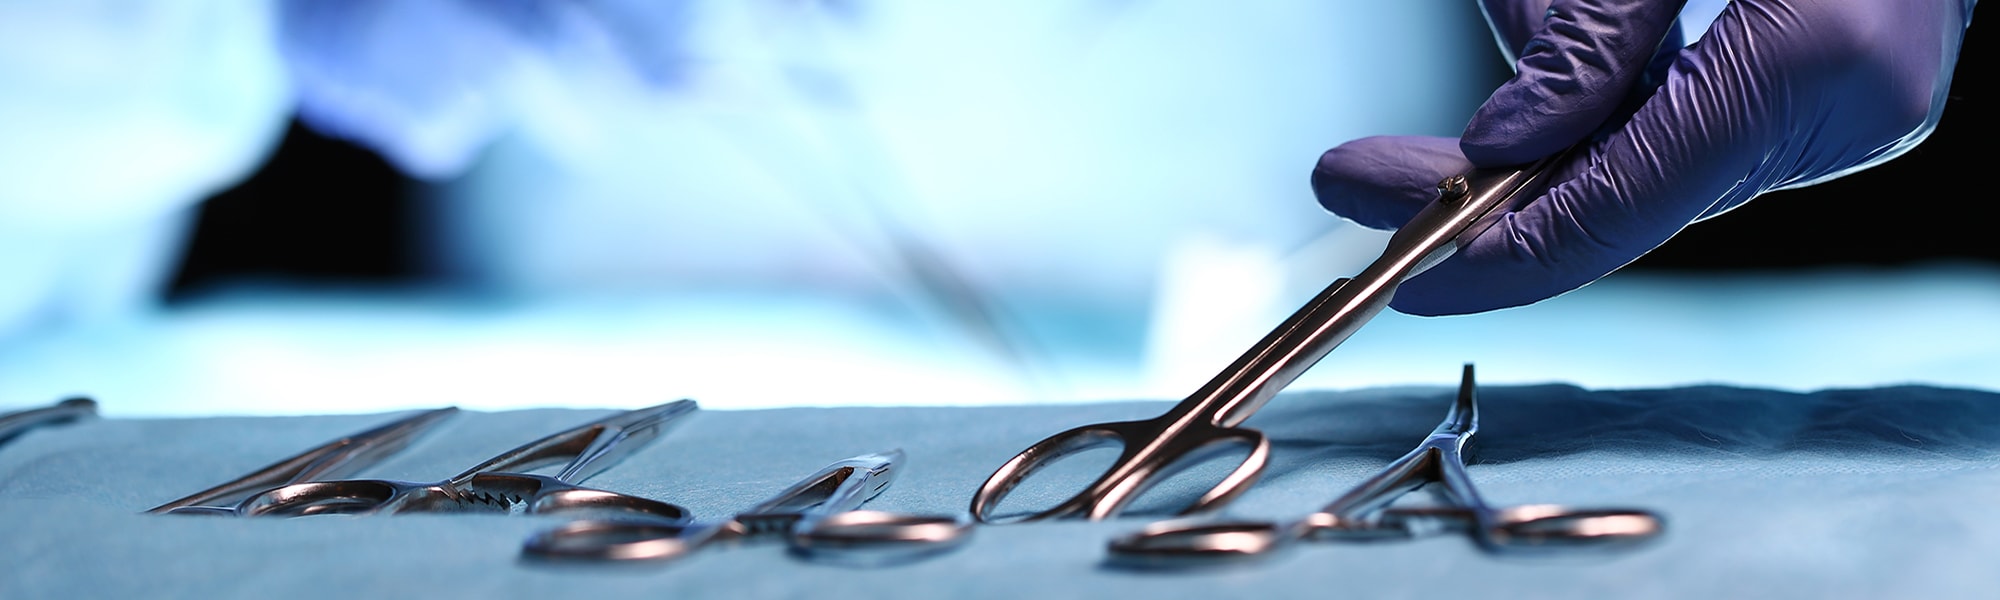 healthcare surgery sterile processing